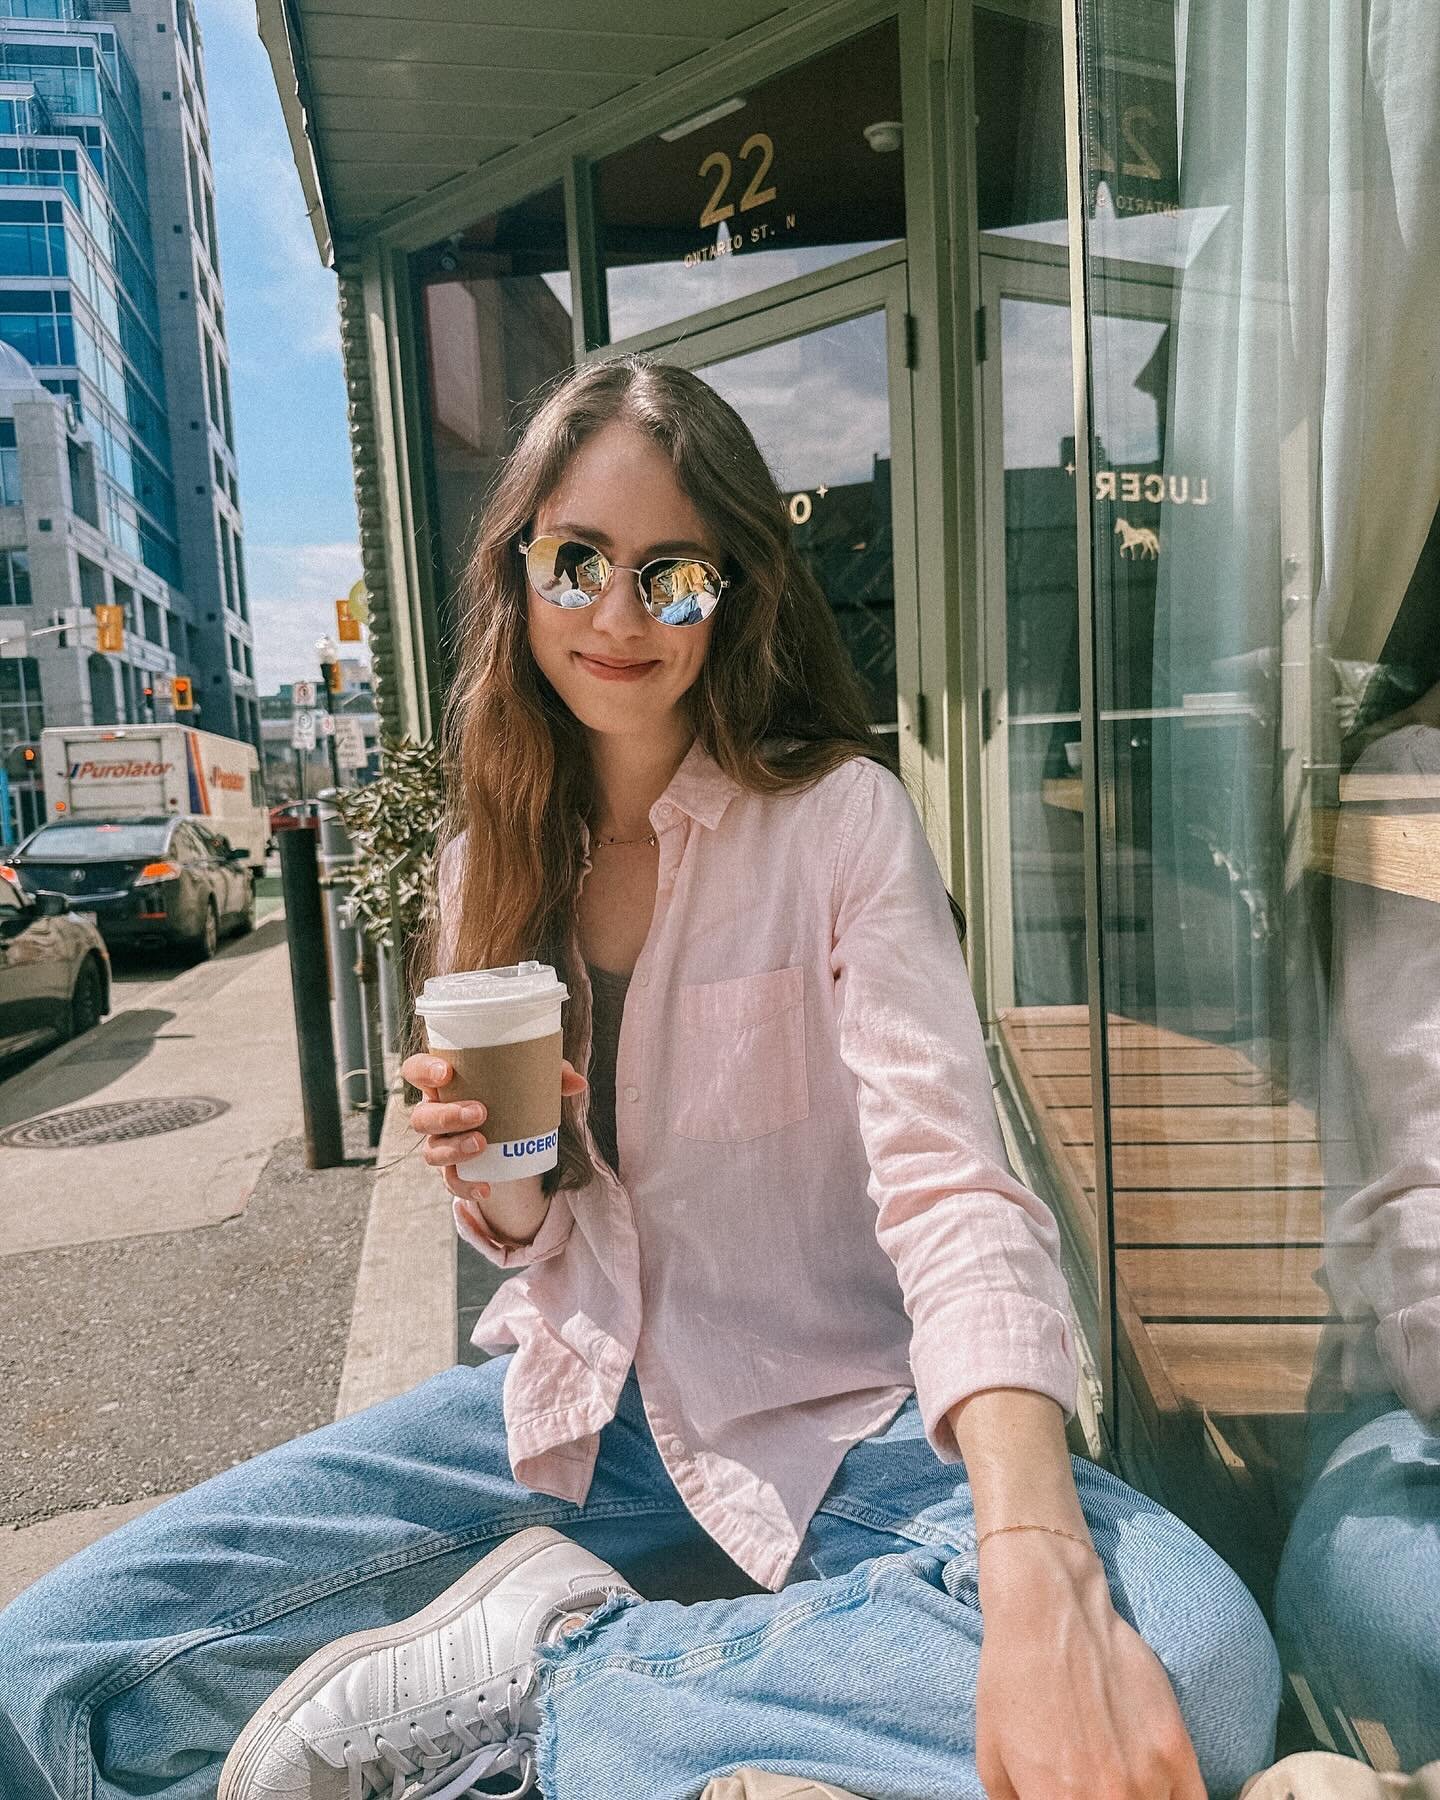 Grateful for sunshine. Grateful for jacket-free weather.

For the colour green.

For peppermint tea and long hair.

For gen z bringing back baggy jeans.

For friends who say &ldquo;you&rsquo;re such a vibe, let me get a pic of you&rdquo;.

And for an